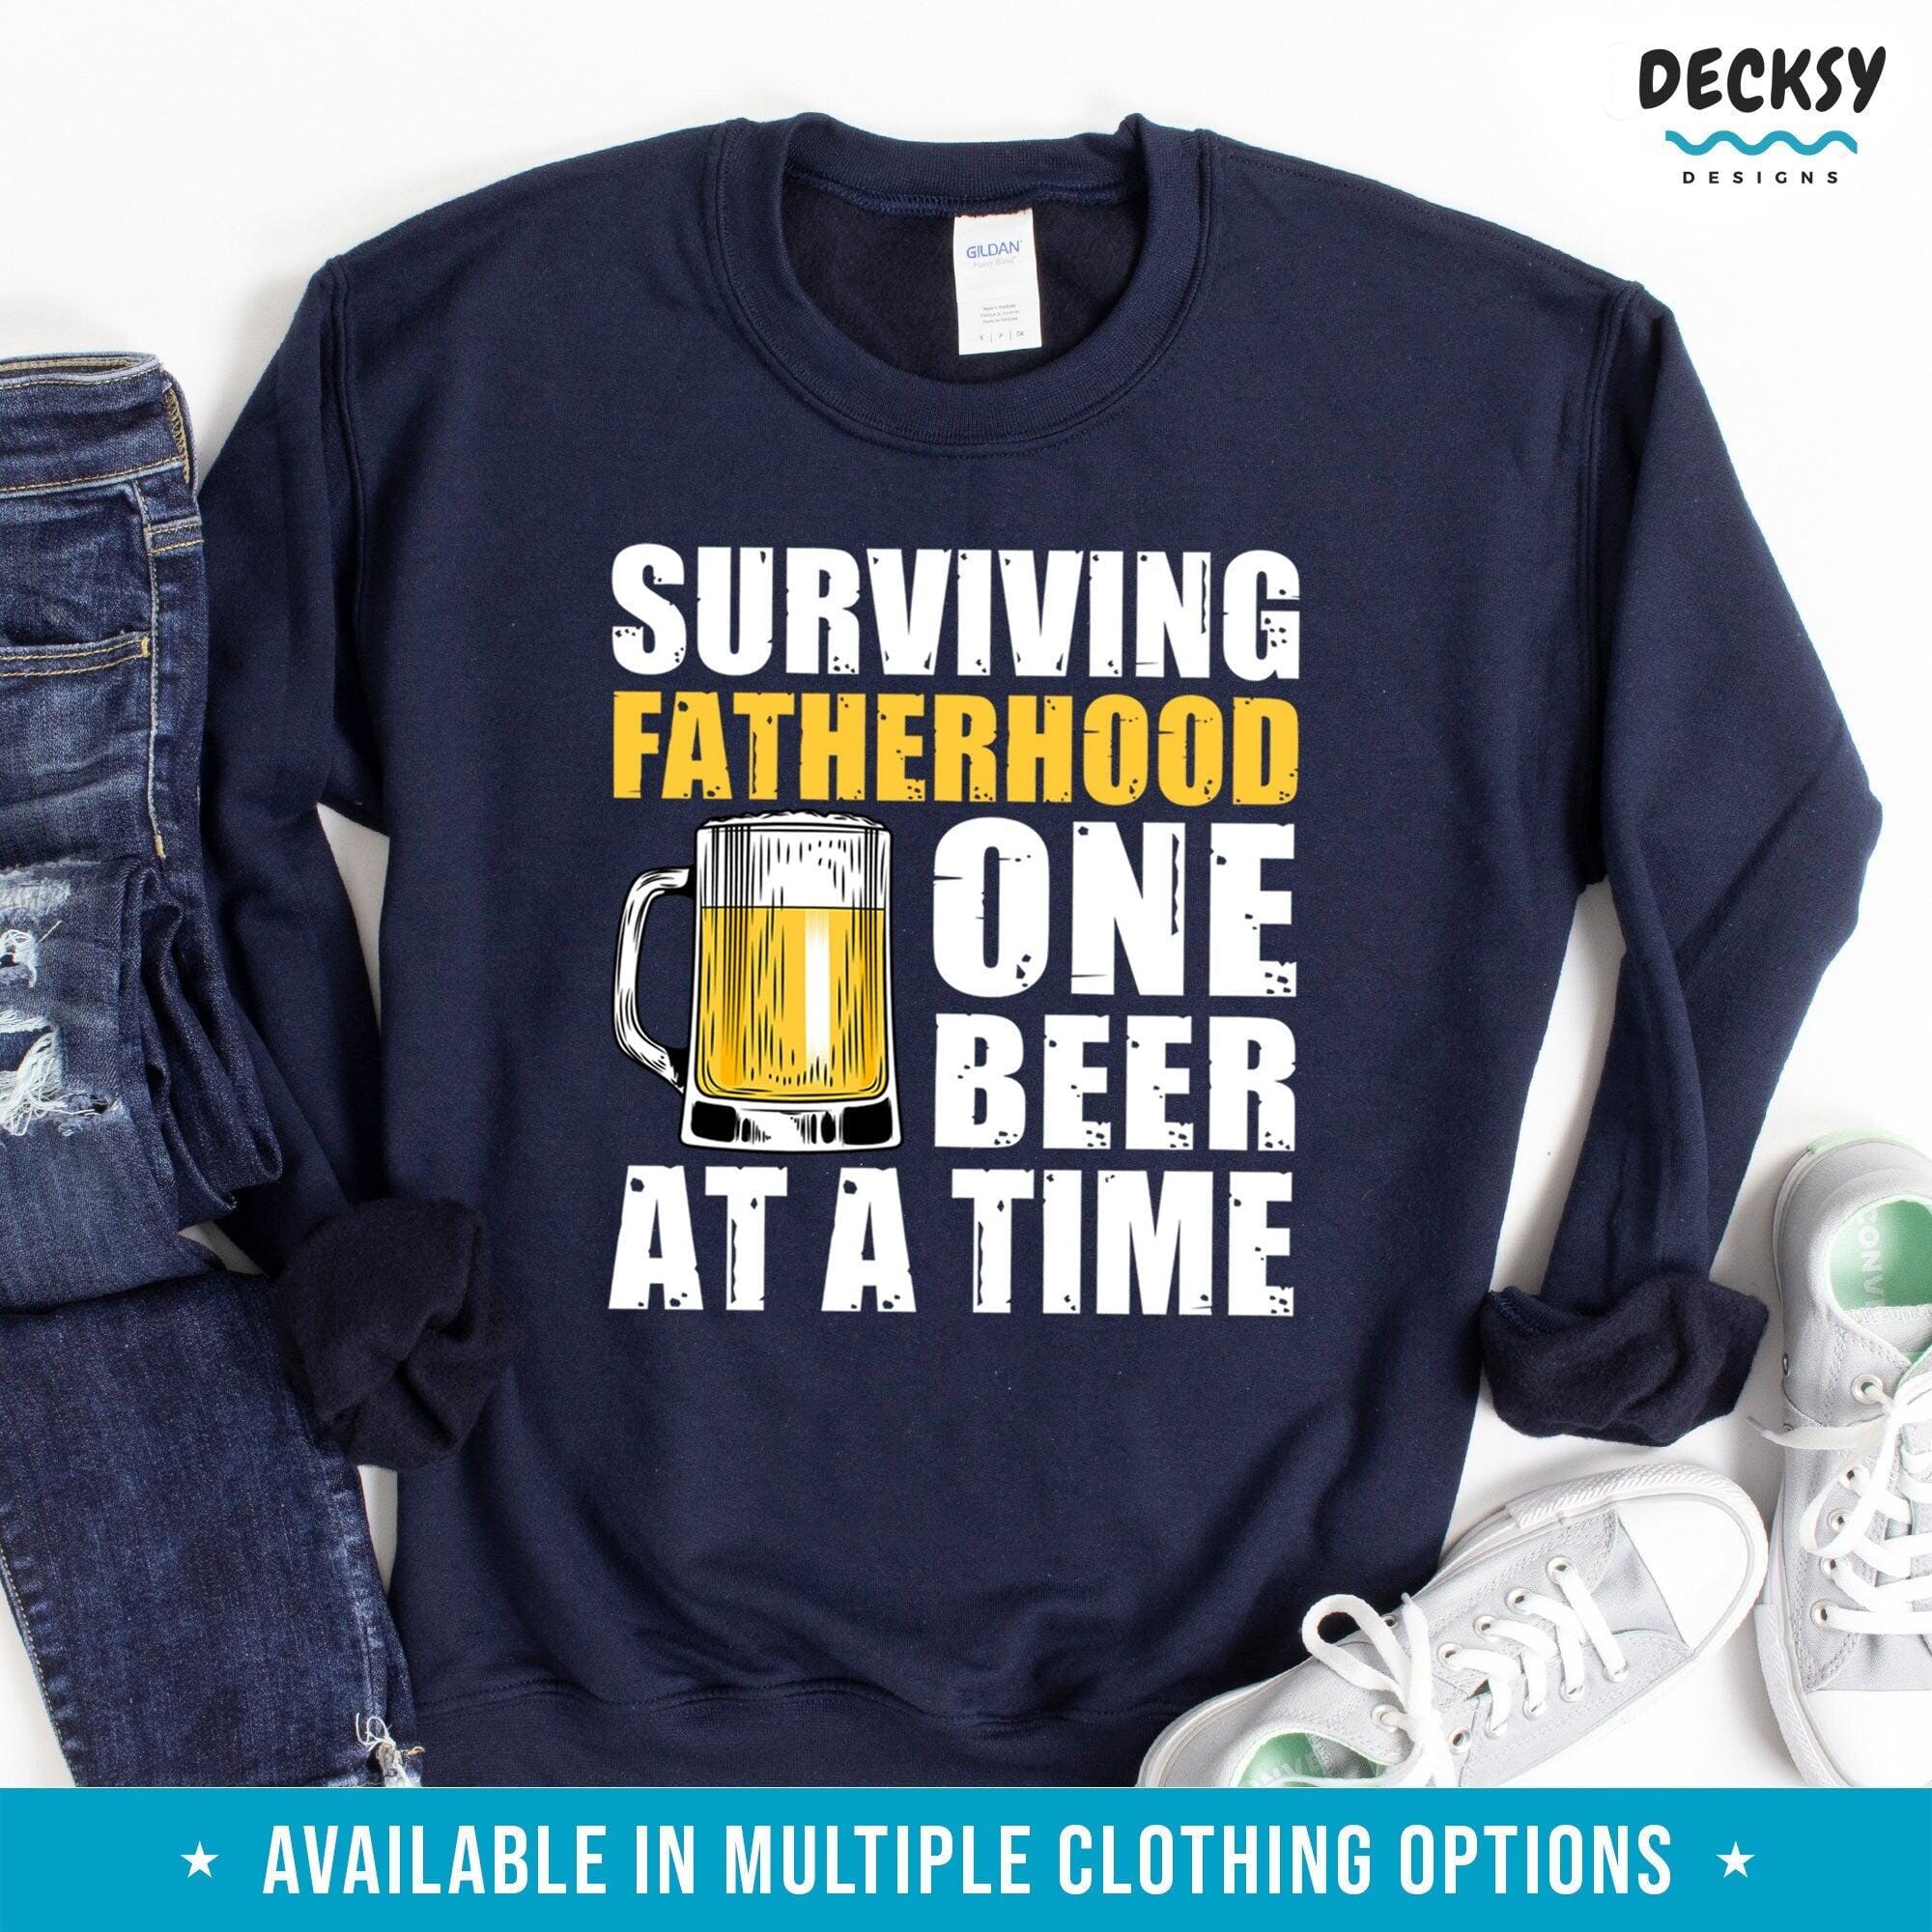 New Dad Tshirt, Funny Beer Dad Gift-Clothing:Gender-Neutral Adult Clothing:Tops & Tees:T-shirts:Graphic Tees-DecksyDesigns